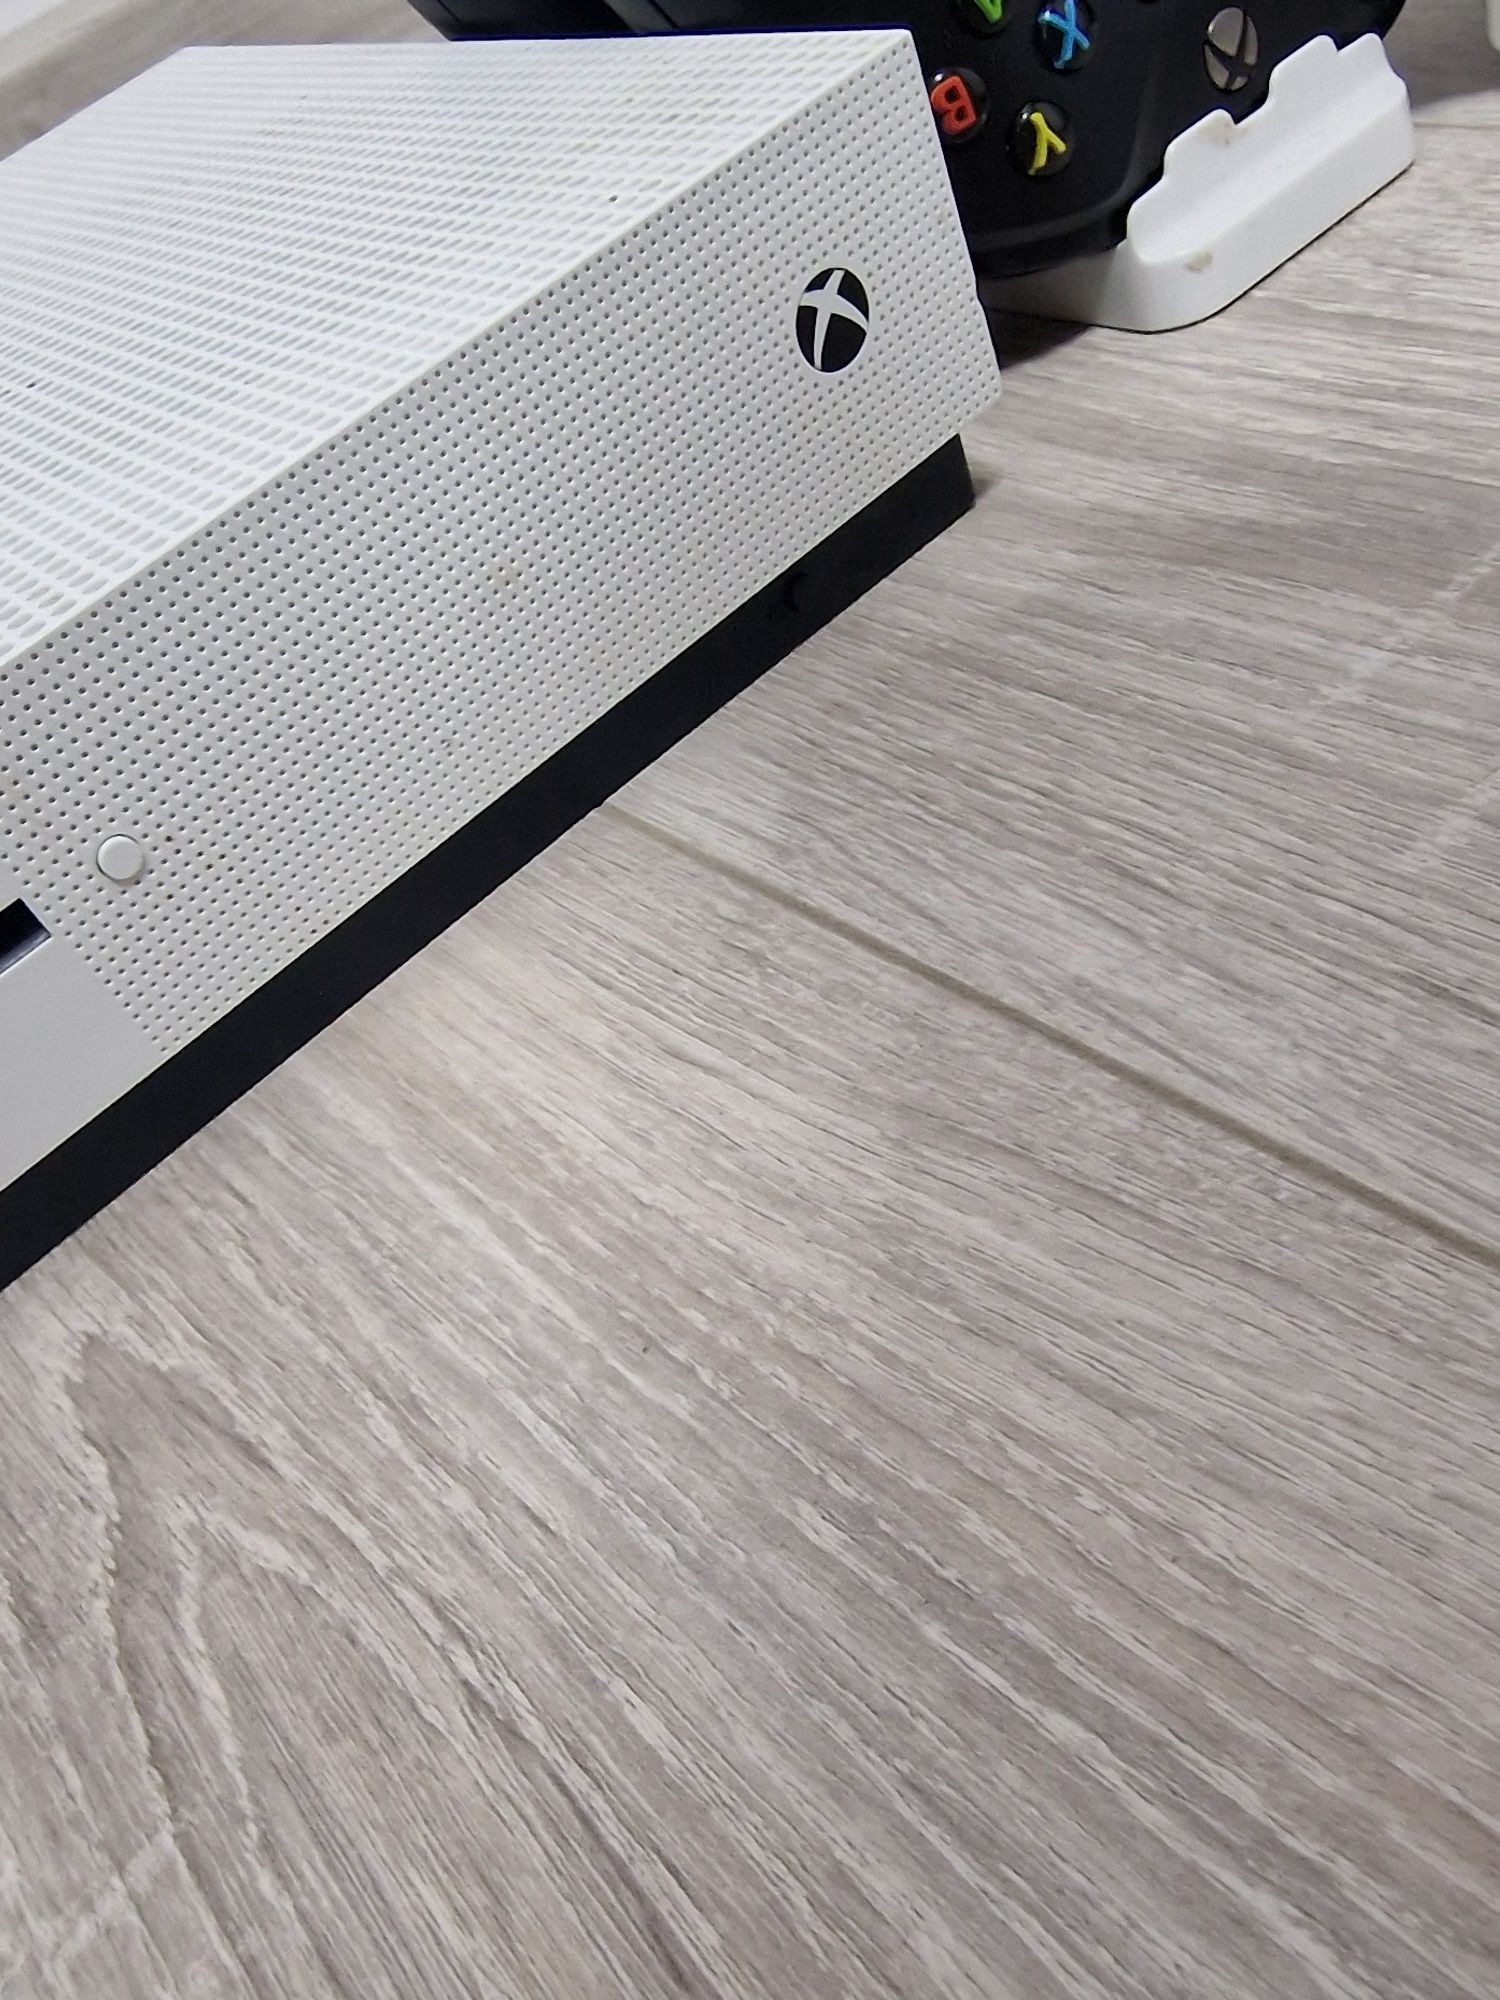 Xbox one s, 2 controllere